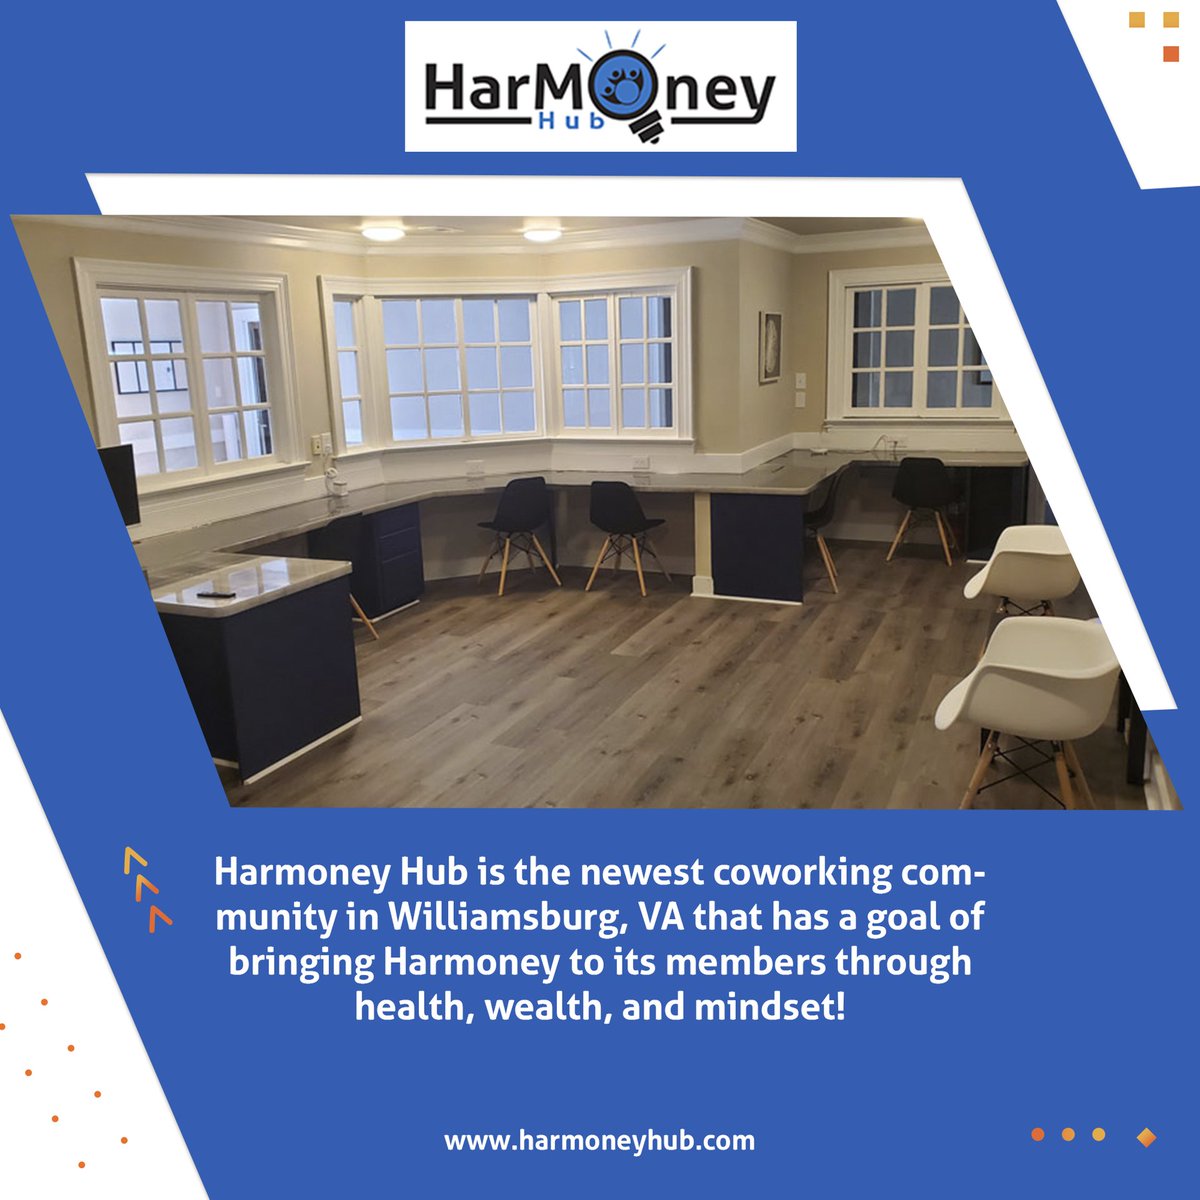 Welcome to our co-working space, where community meets creativity and collaboration. Join us and be a part of something great. #CreativityAtWork #harmoneyhub #coworkingspace #coworkingSpaceVIrginia #coworkingcommunity #coworkingoffice #coworking #coworkoffice #coworkspace